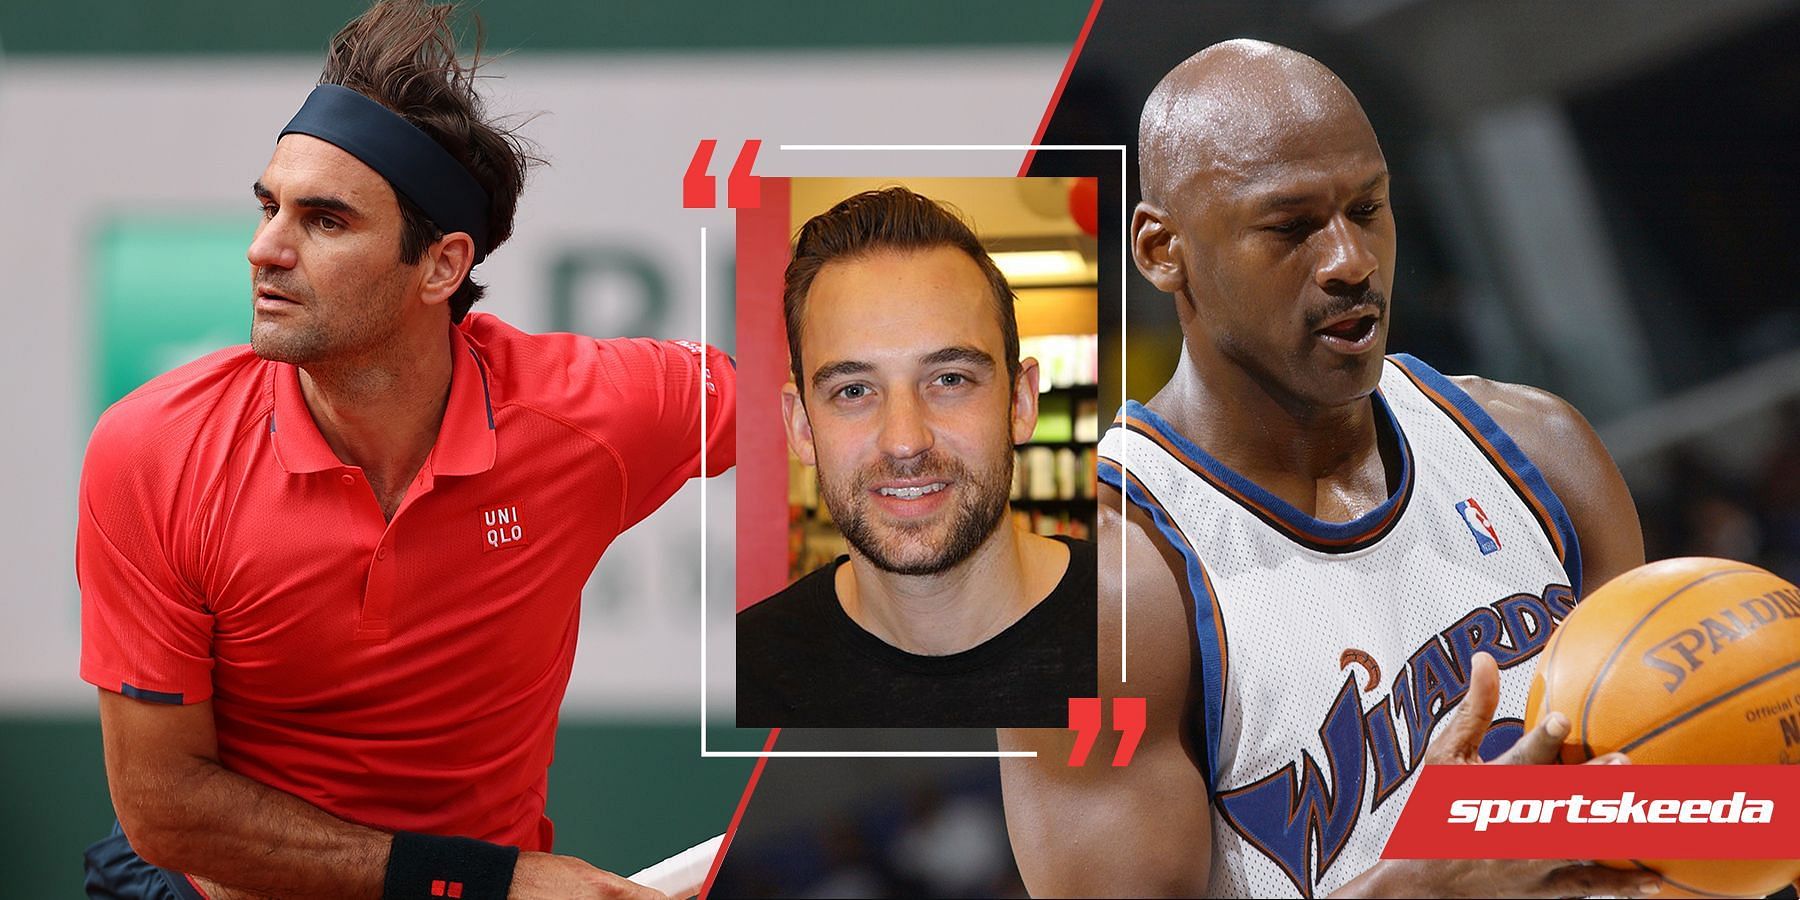 When I see great athletes like Michael Jordan or Roger Federer, I have the  impression that what they do is simple - Renowned Swiss Novelist Joel  Dicker on his efforts to make